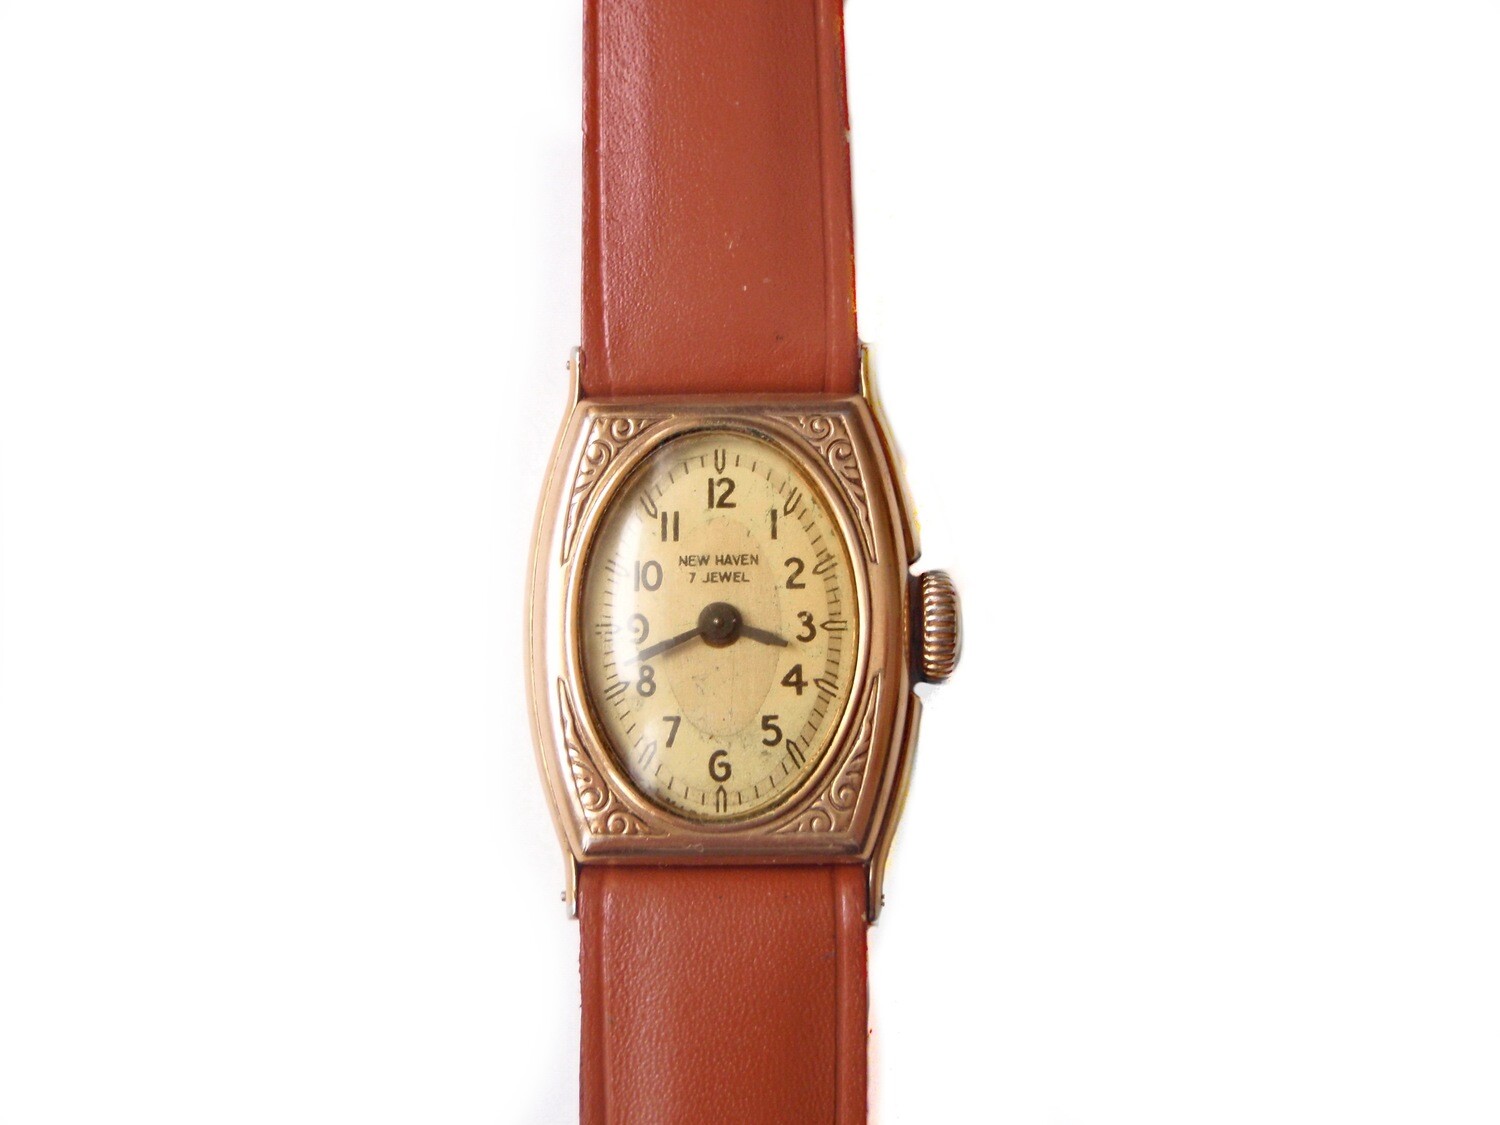 1920's New Haven Laides Two Tone Wristwatch
